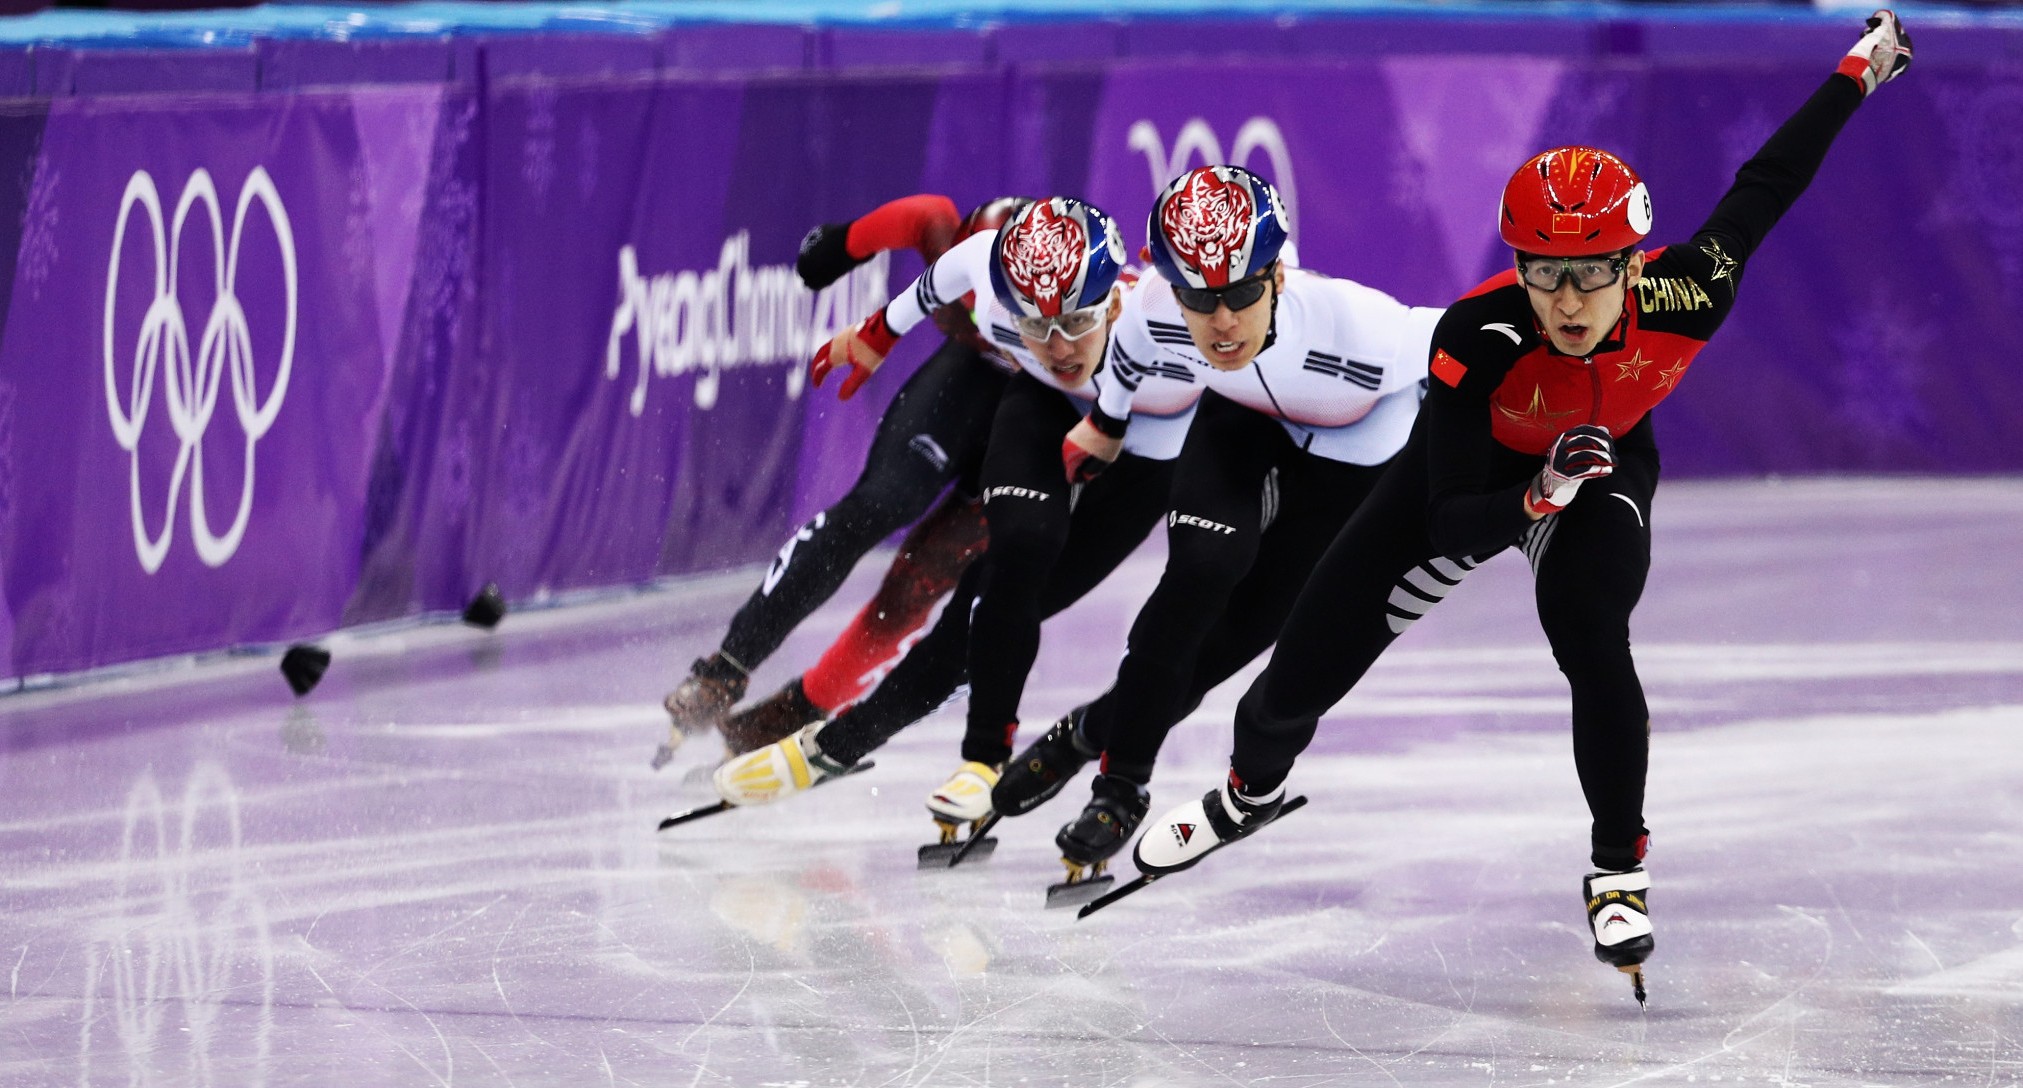 OlymPicks: 2022 Venues Go Green; Star Korean Coach to Helm Chinese Speed Skaters